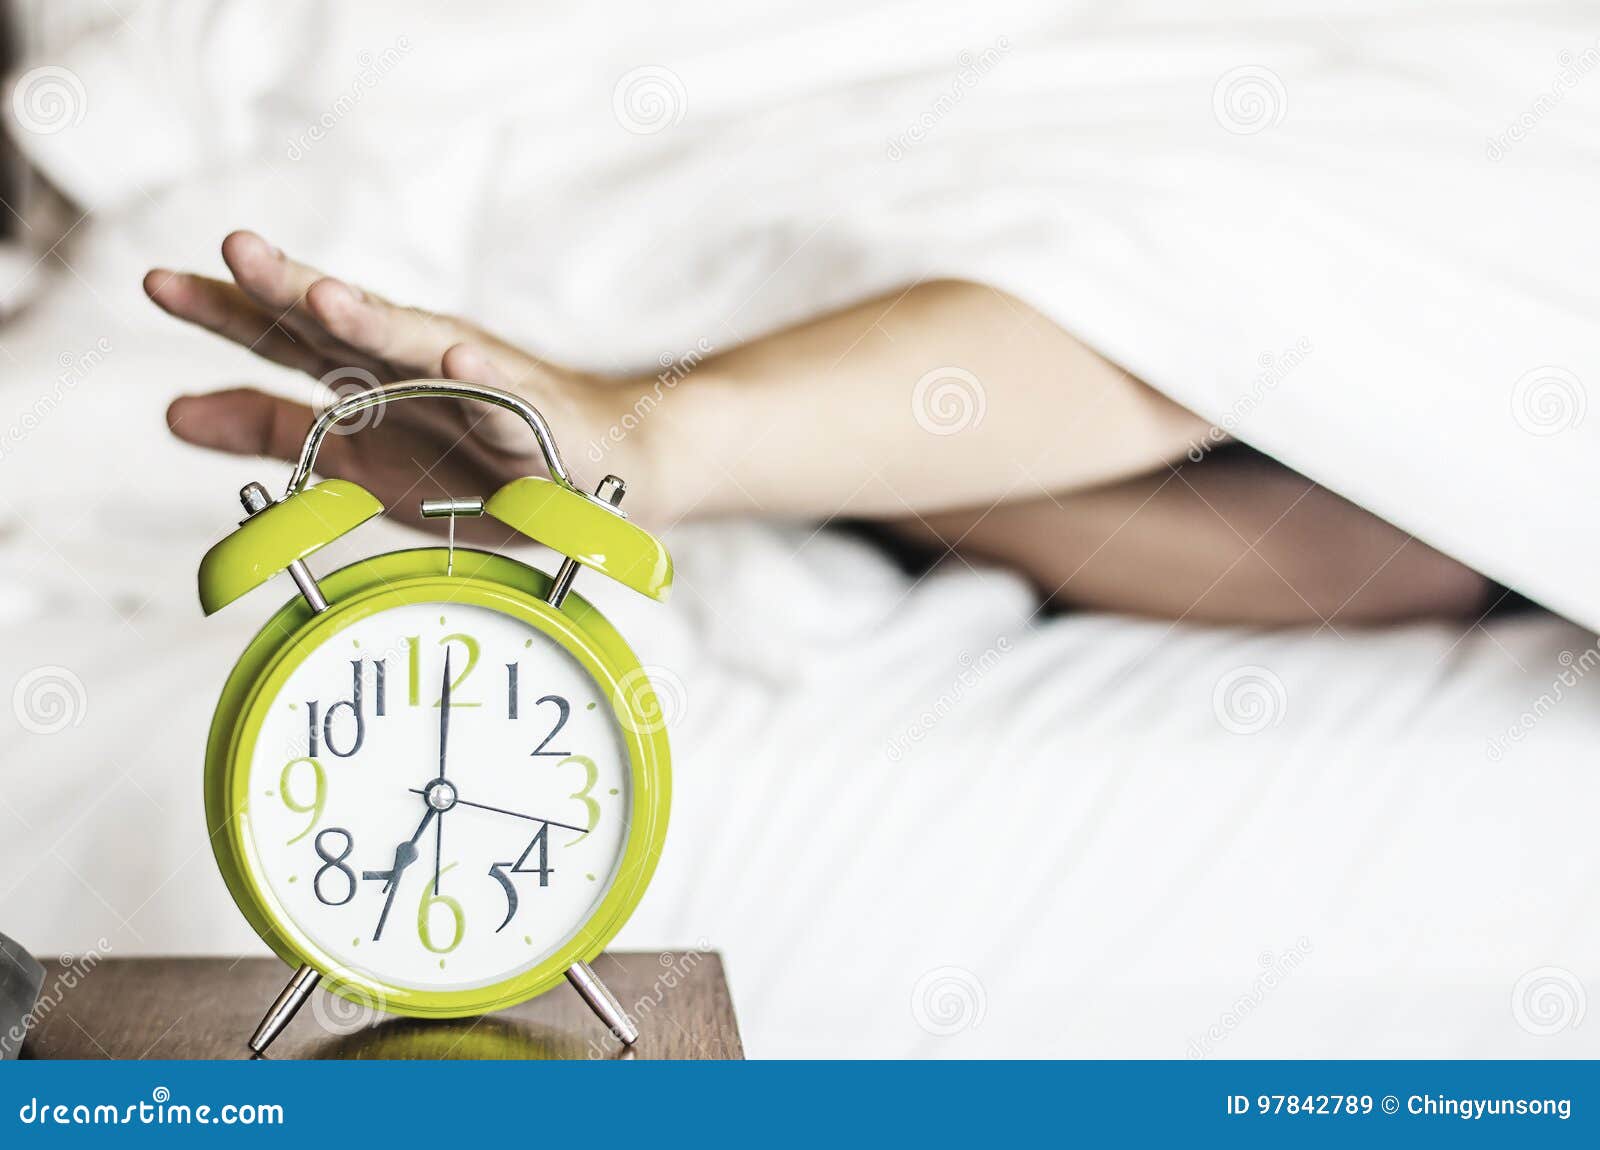 sleeping asian young male disturbed by alarm clock early morning